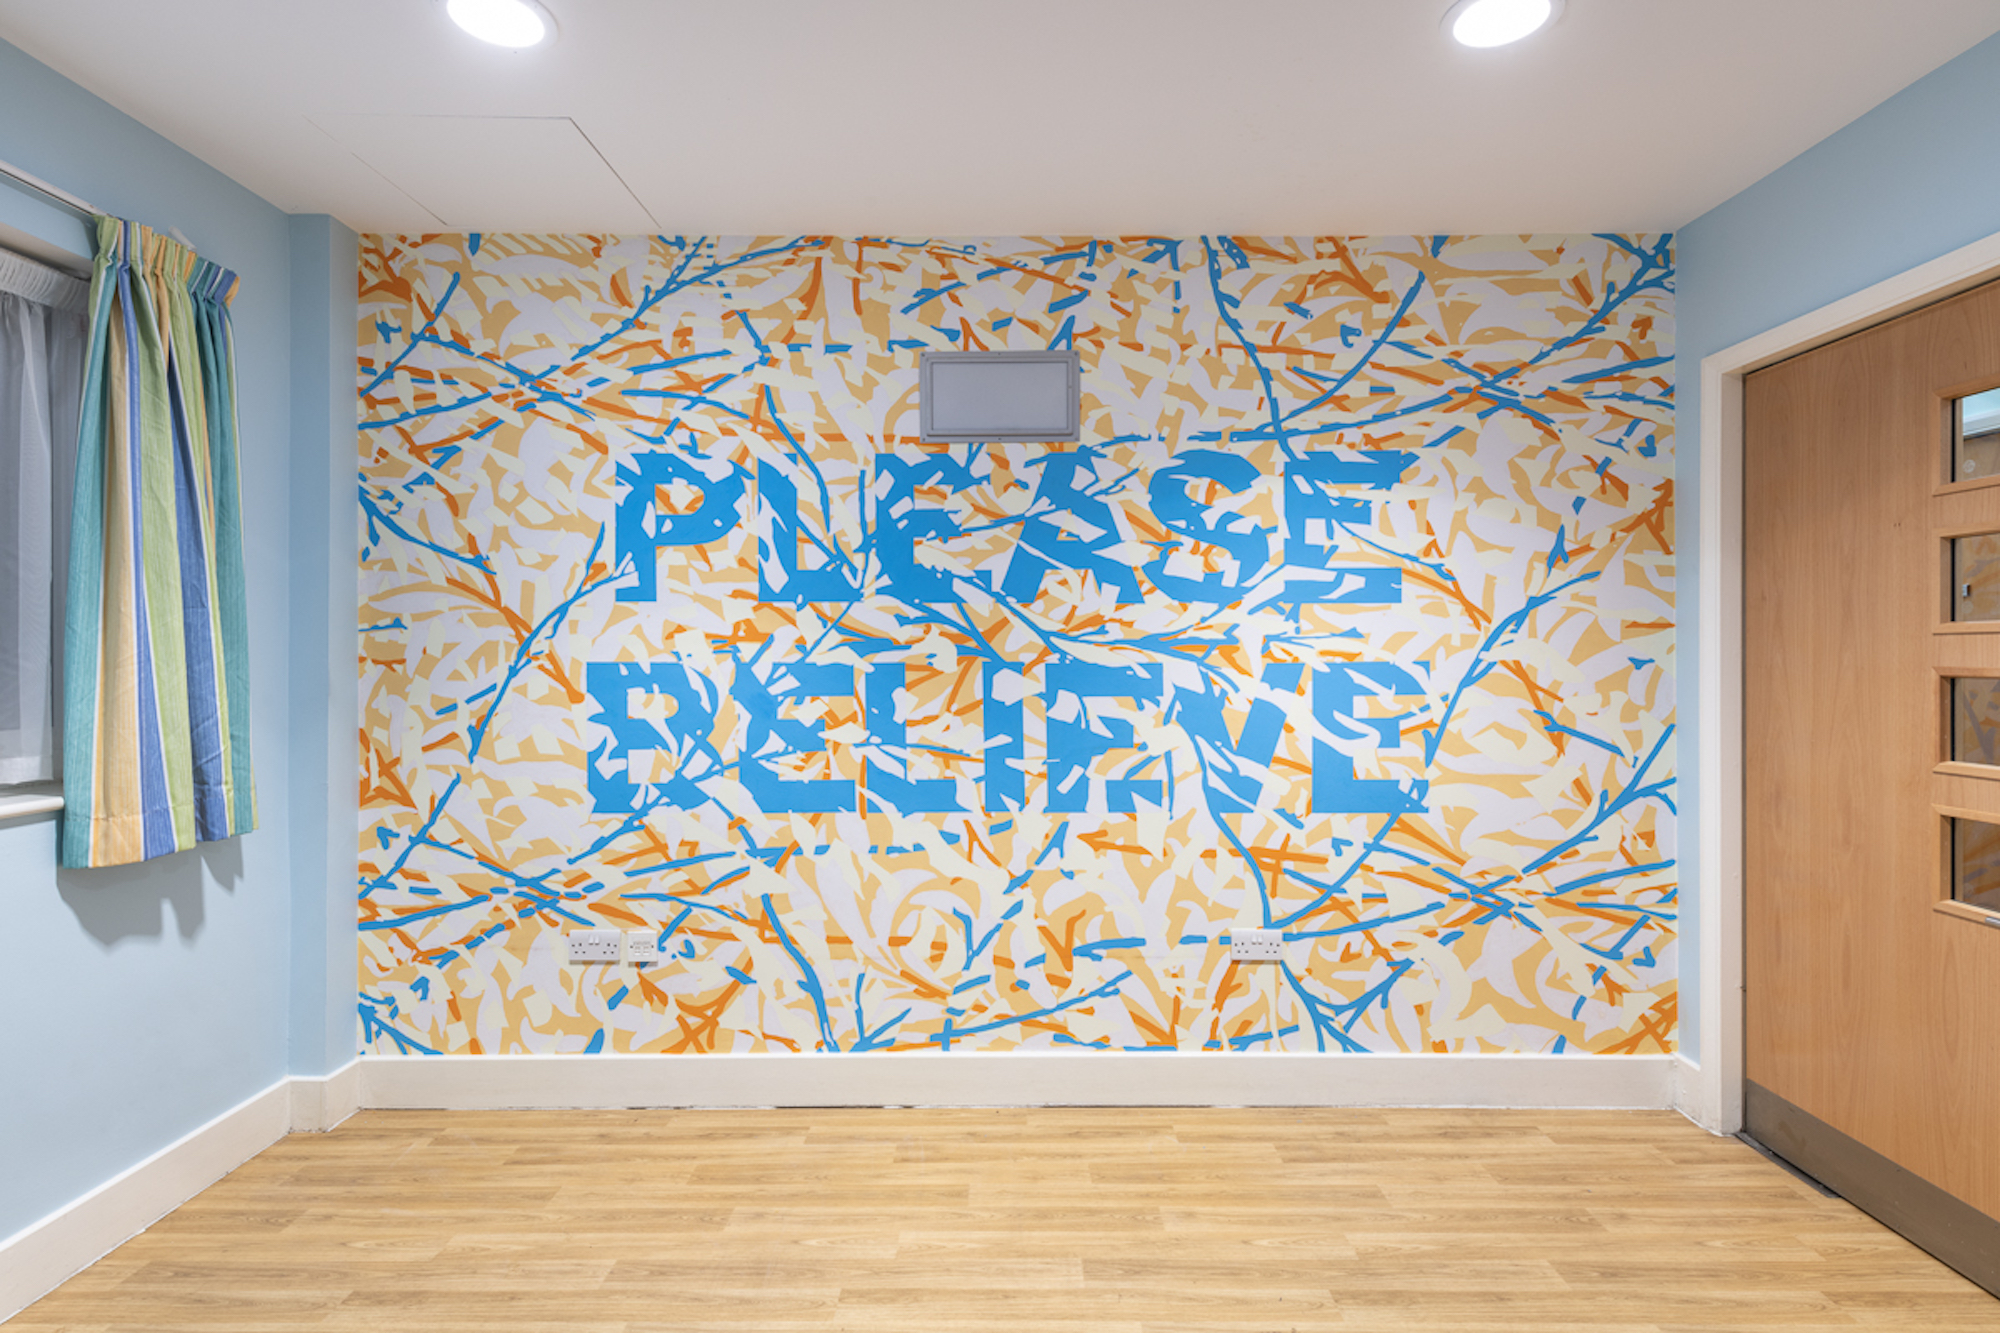 Mark Titchner, Please Believe, TV Room, Bluebell Lodge. Courtesy Hospital Rooms